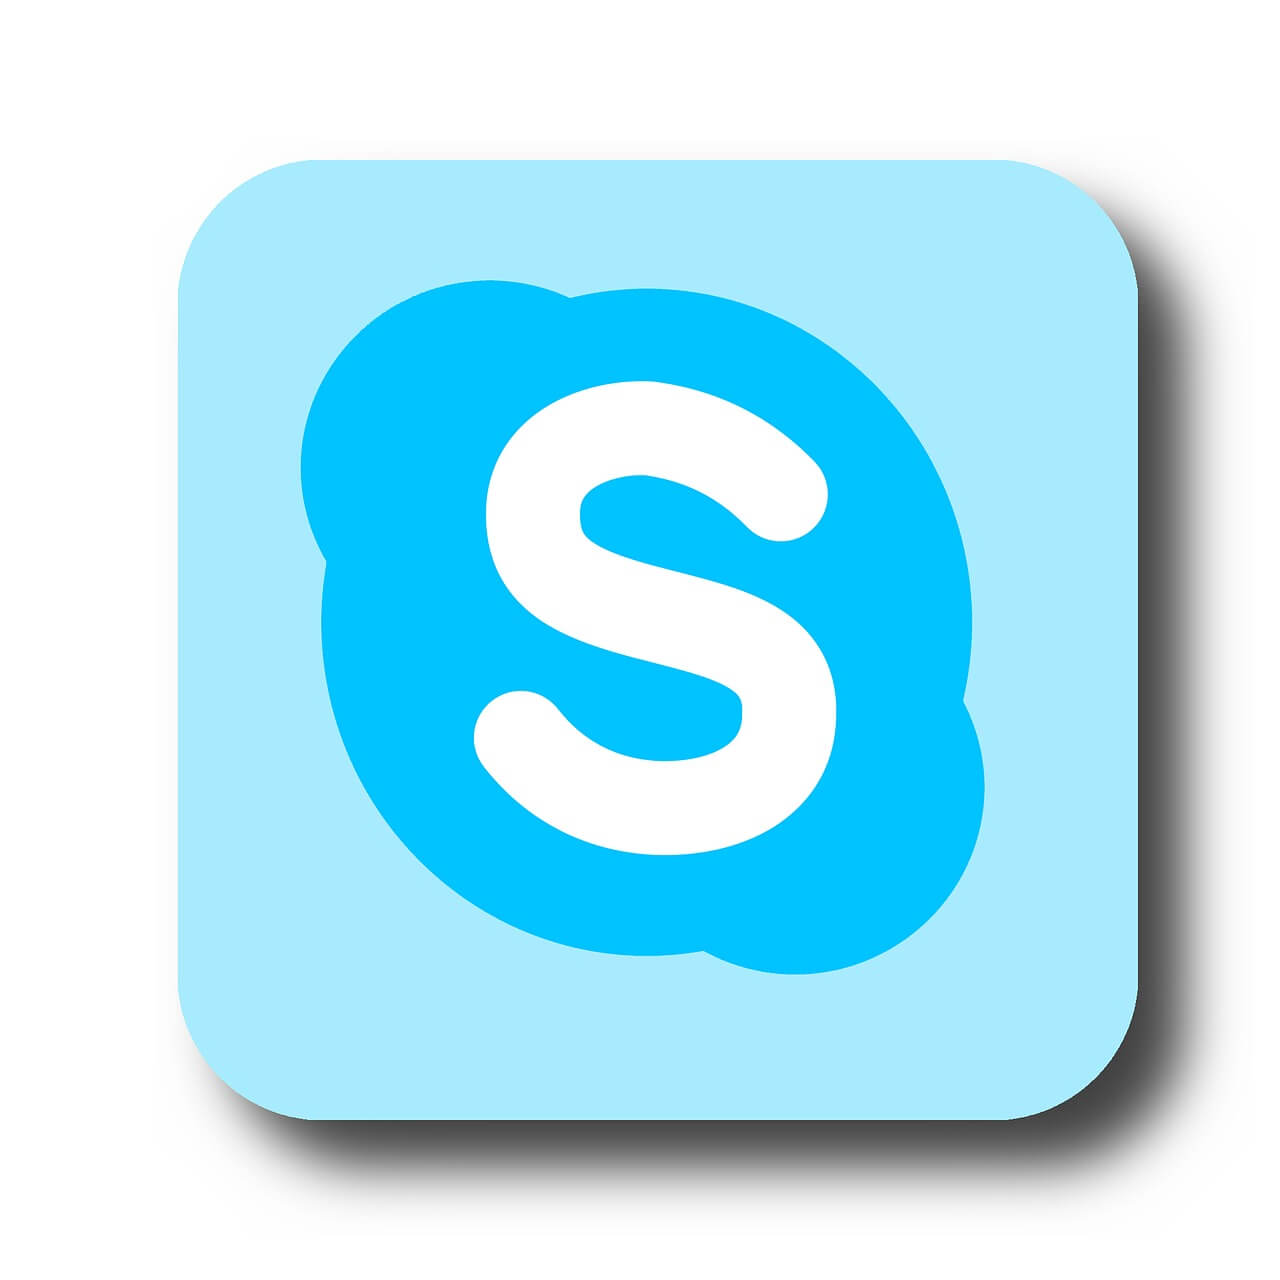 Skype's chat panel shifts to the right of the screen